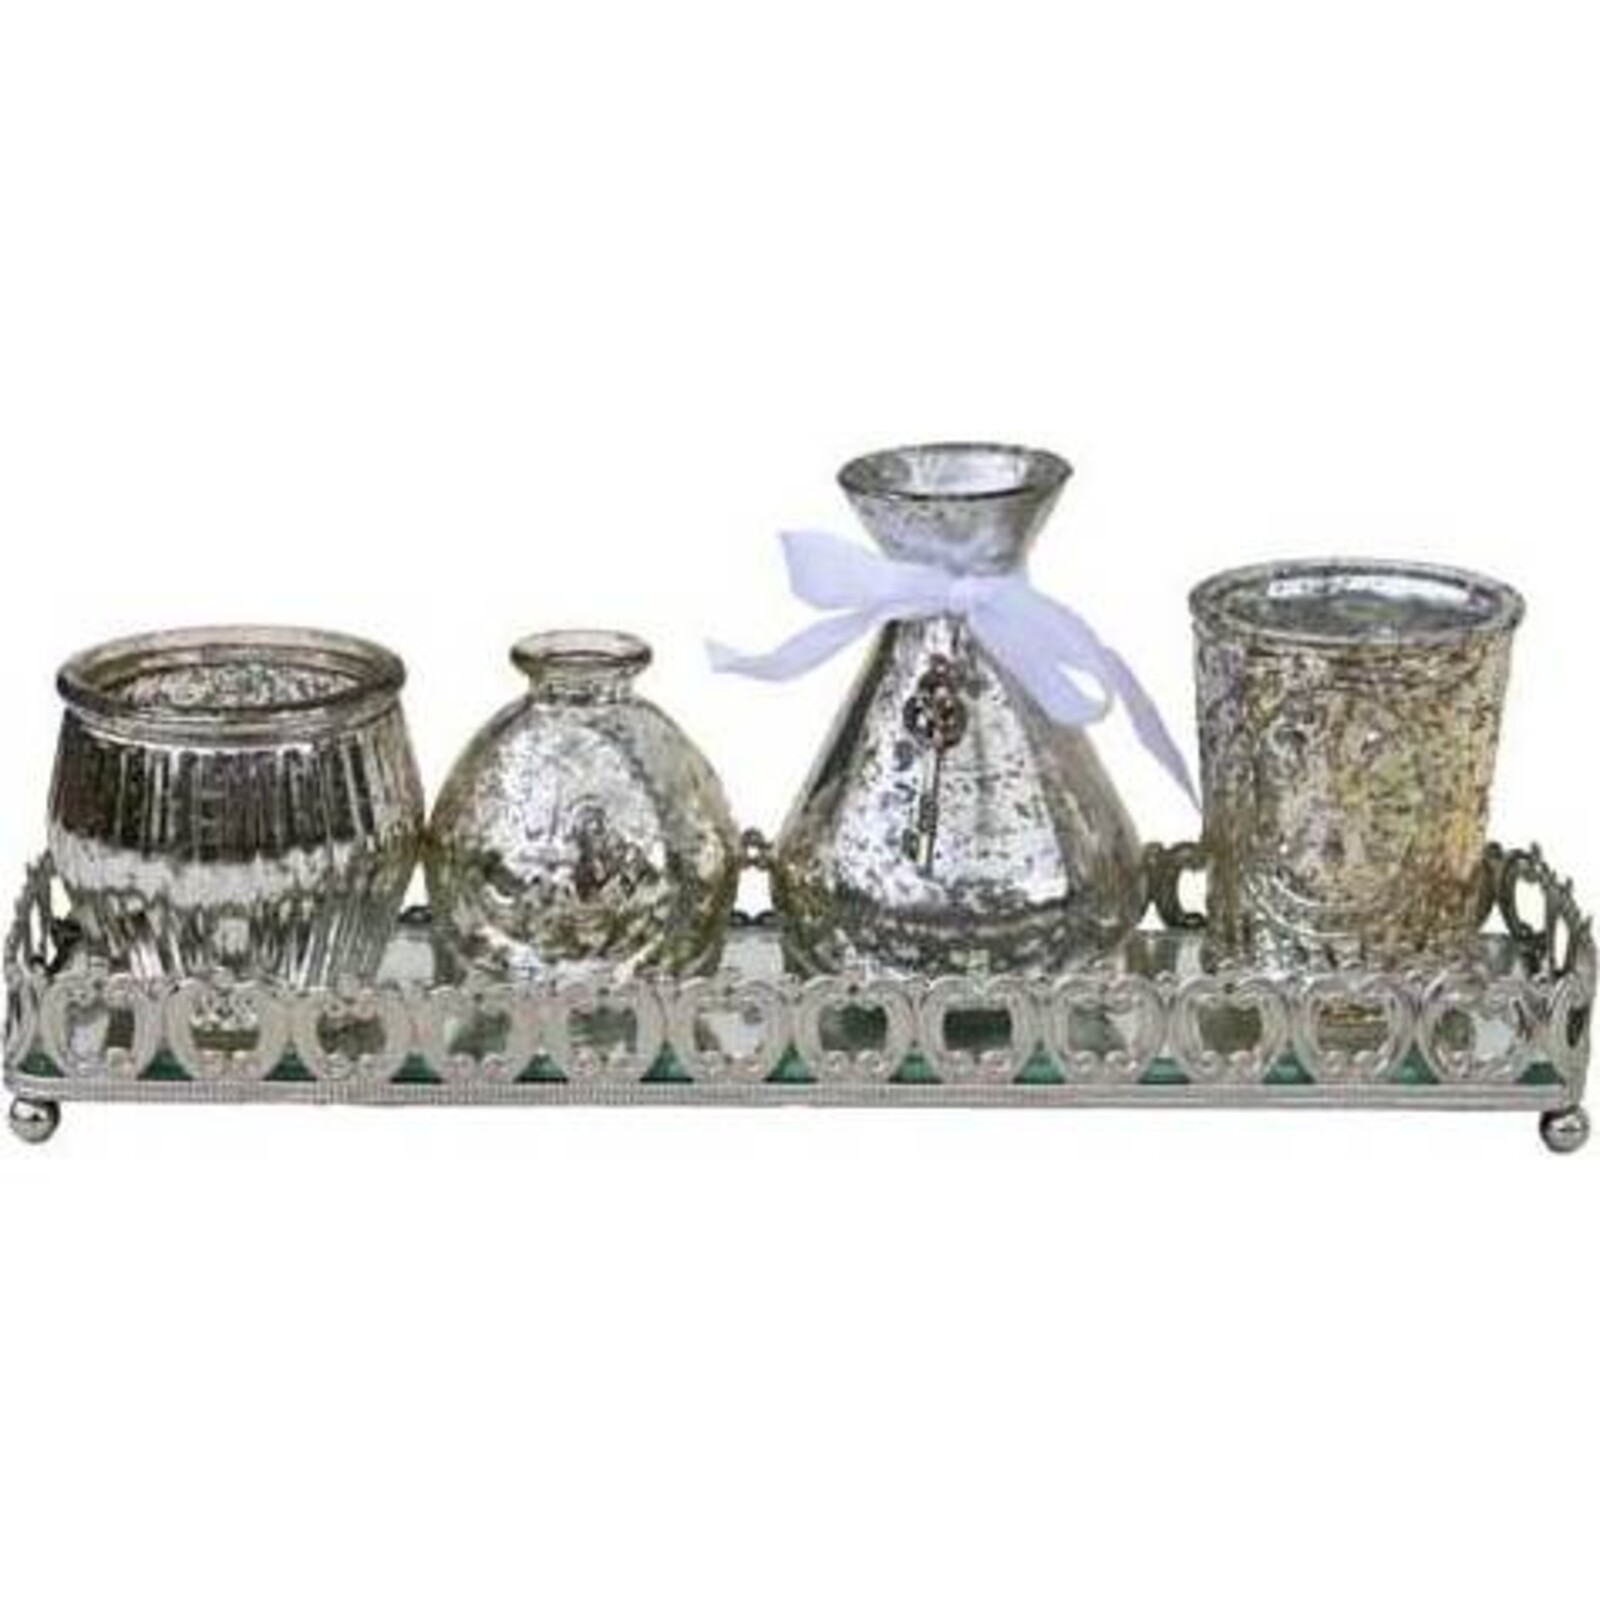 Vases On Long Mirror Tray